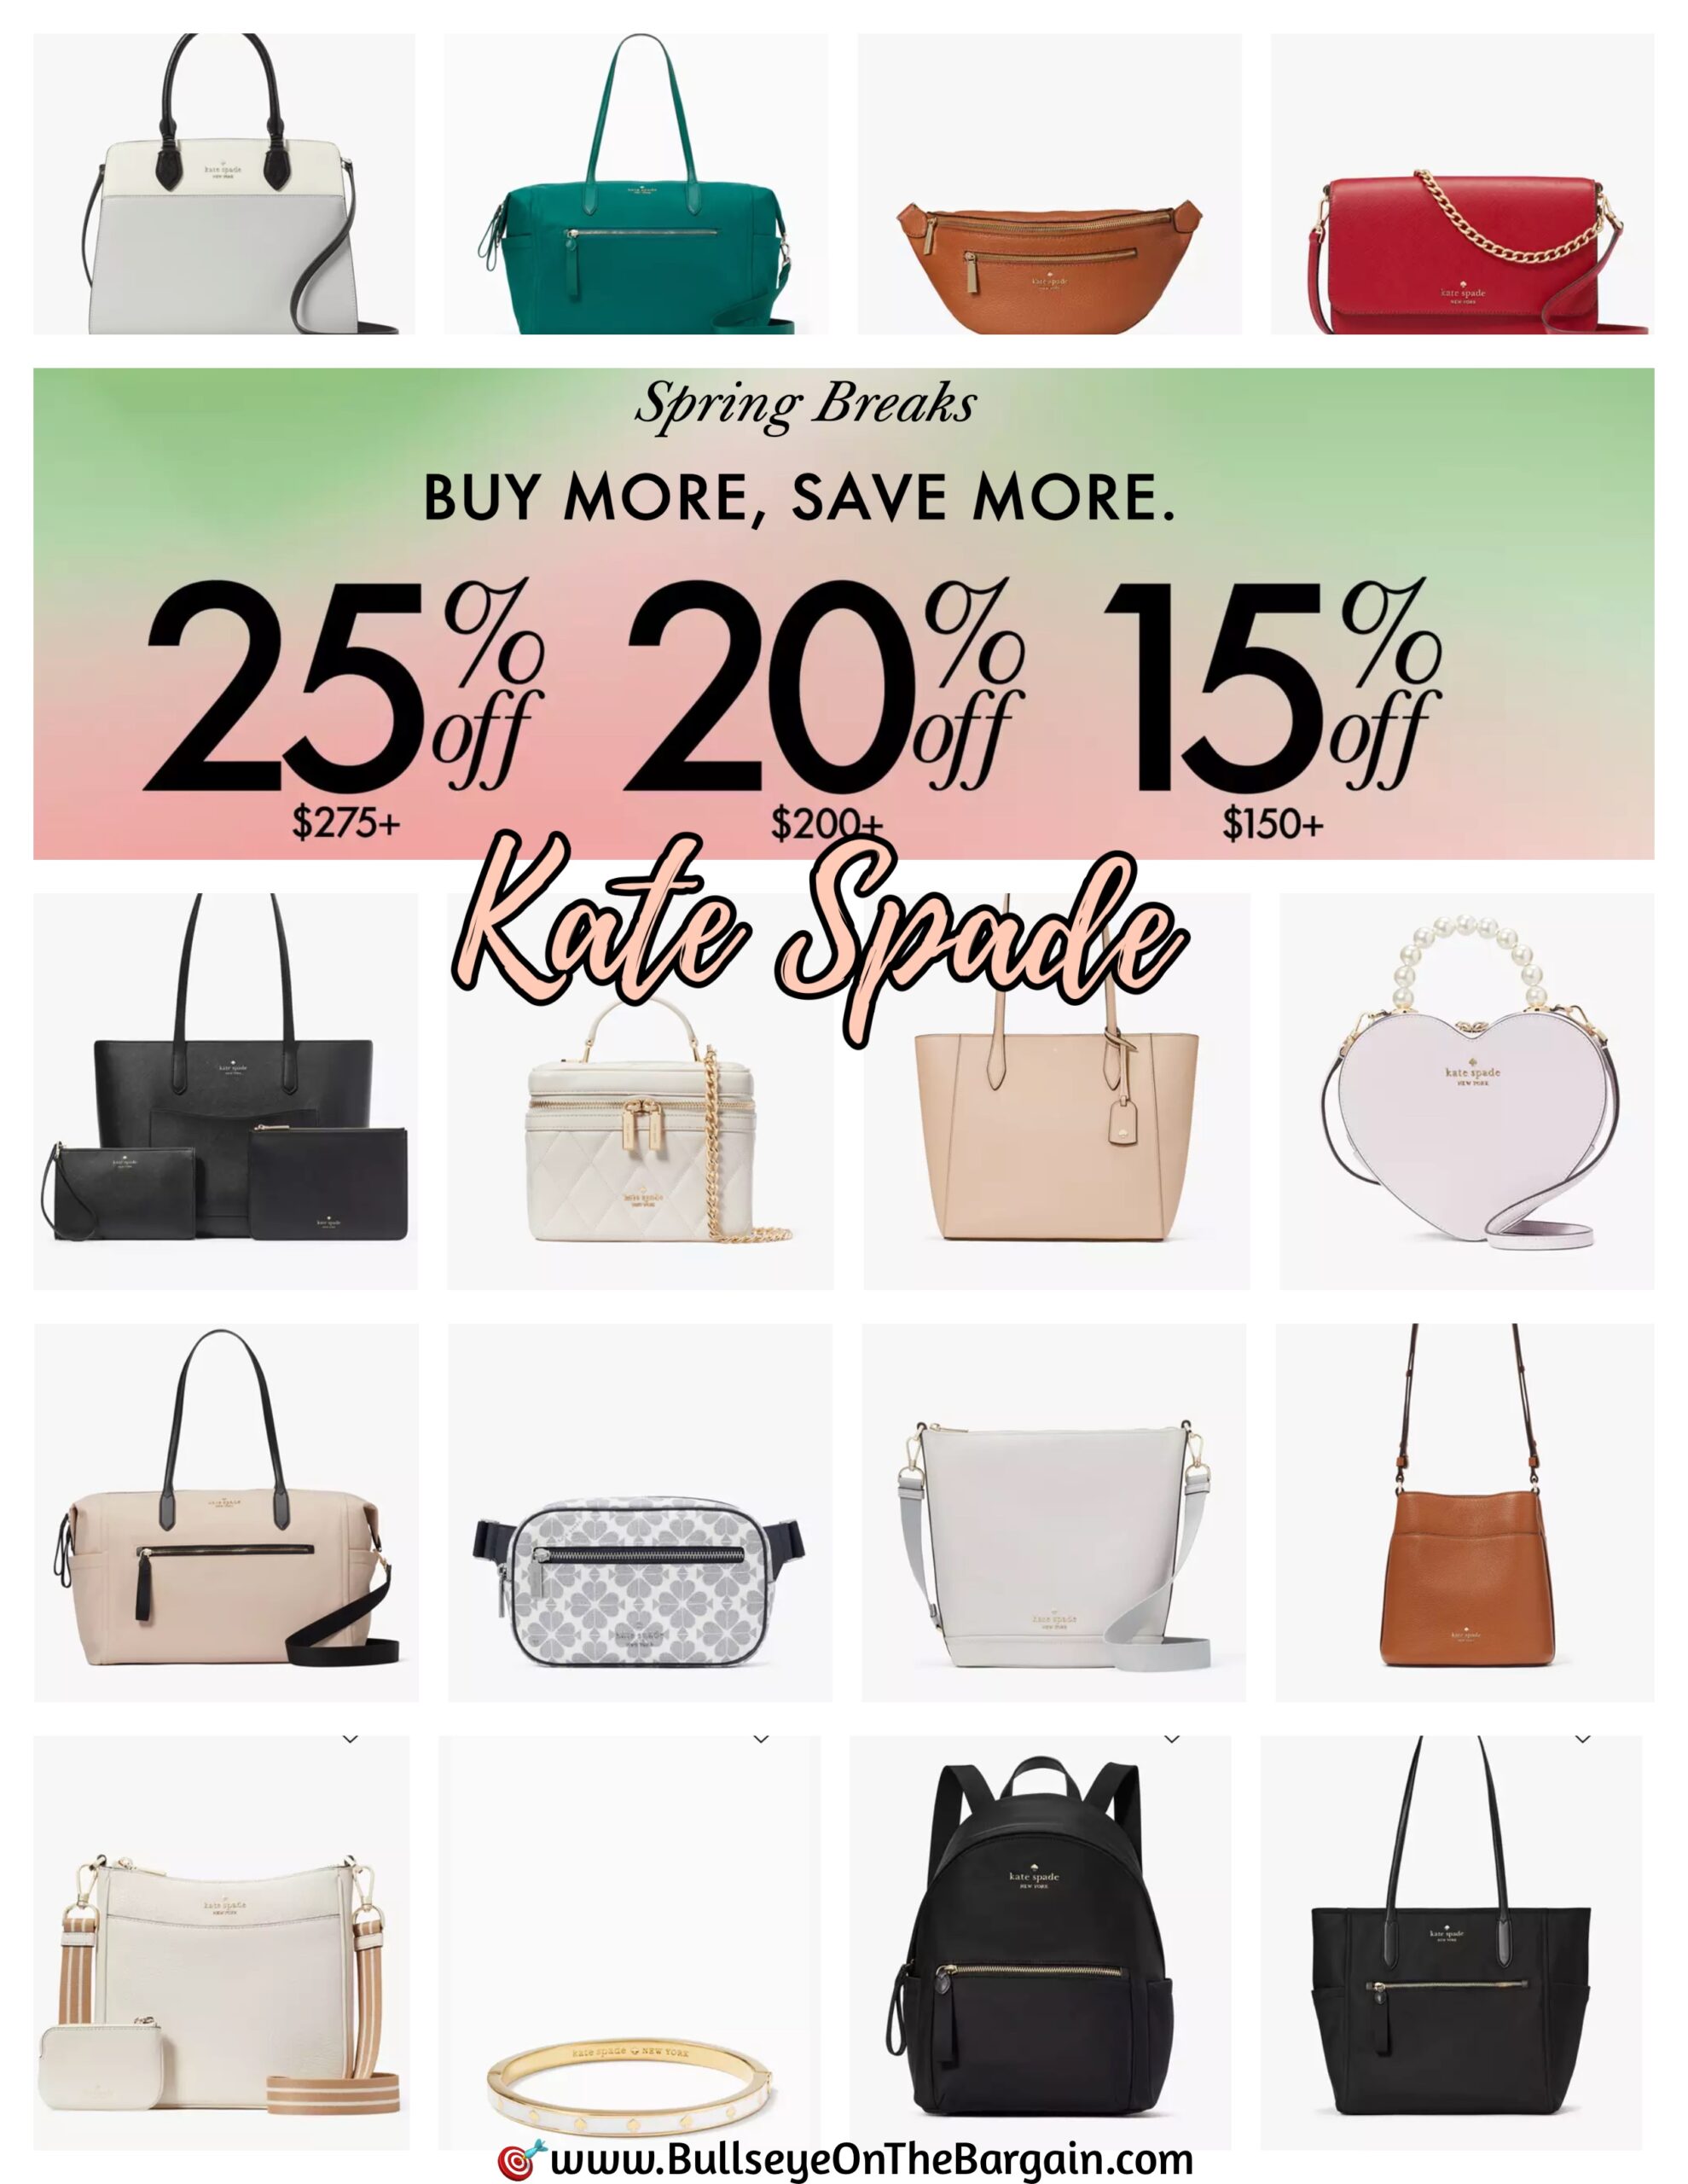 OH YEAH BABY! Check out this Kate Spade SPRING BREAK S-A-L-E with stacked discounts!